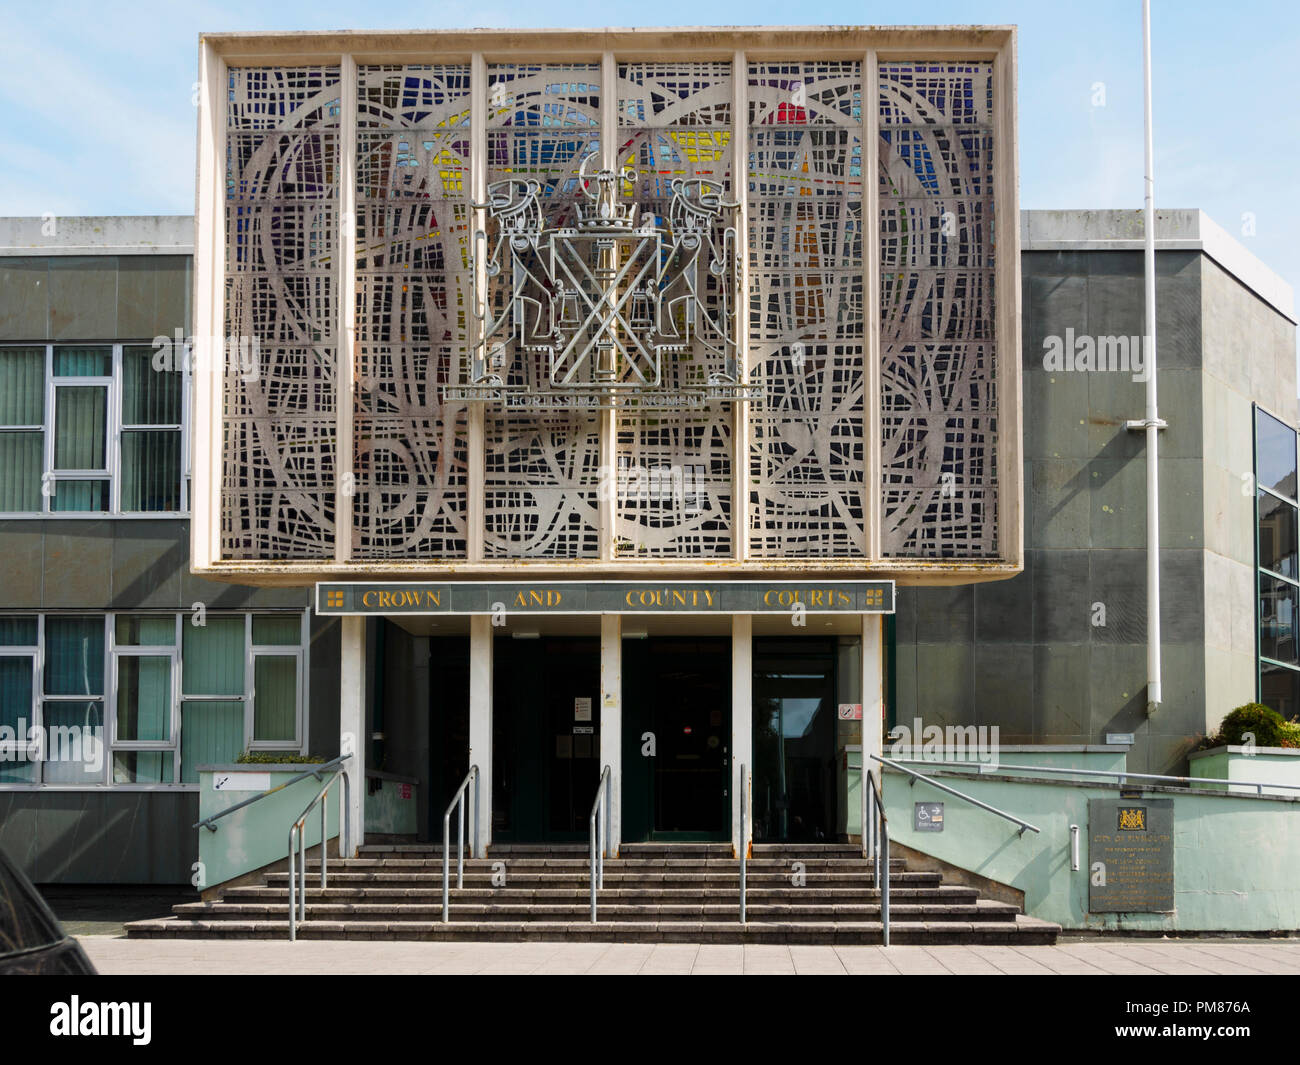 Facade of the Plymouth Crown and County Court building in central Plymouth, Devon, UK Stock Photo